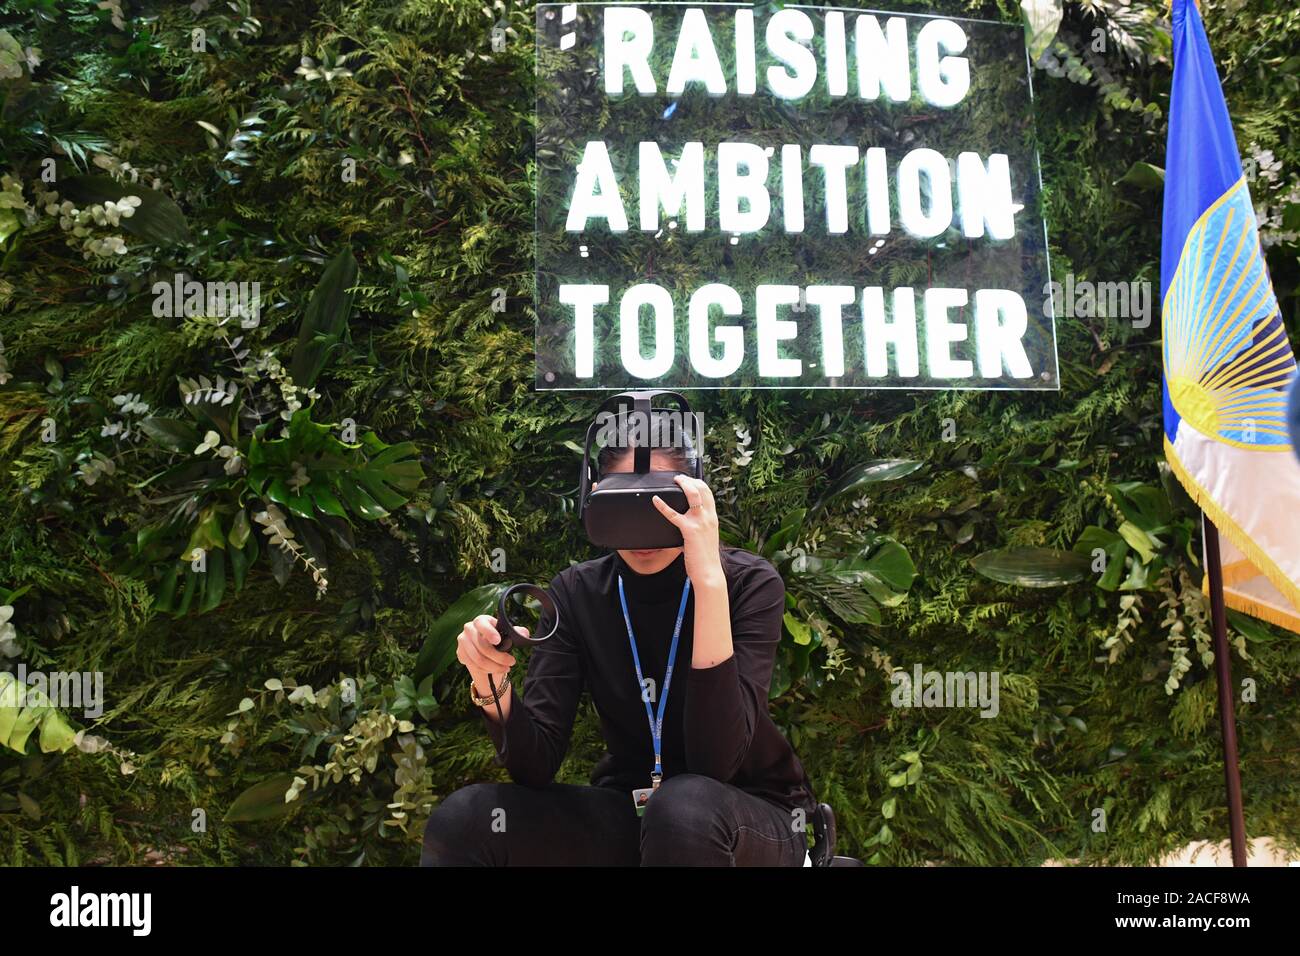 *** STRICTLY NO SALES TO FRENCH MEDIA OR PUBLISHERS *** December 02, 2019 - Madrid, Spain: Atmosphere at the venue of the UN climate conference COP25, where countries and international groups have set up their own pavilion to promote their action against global warming. Stock Photo